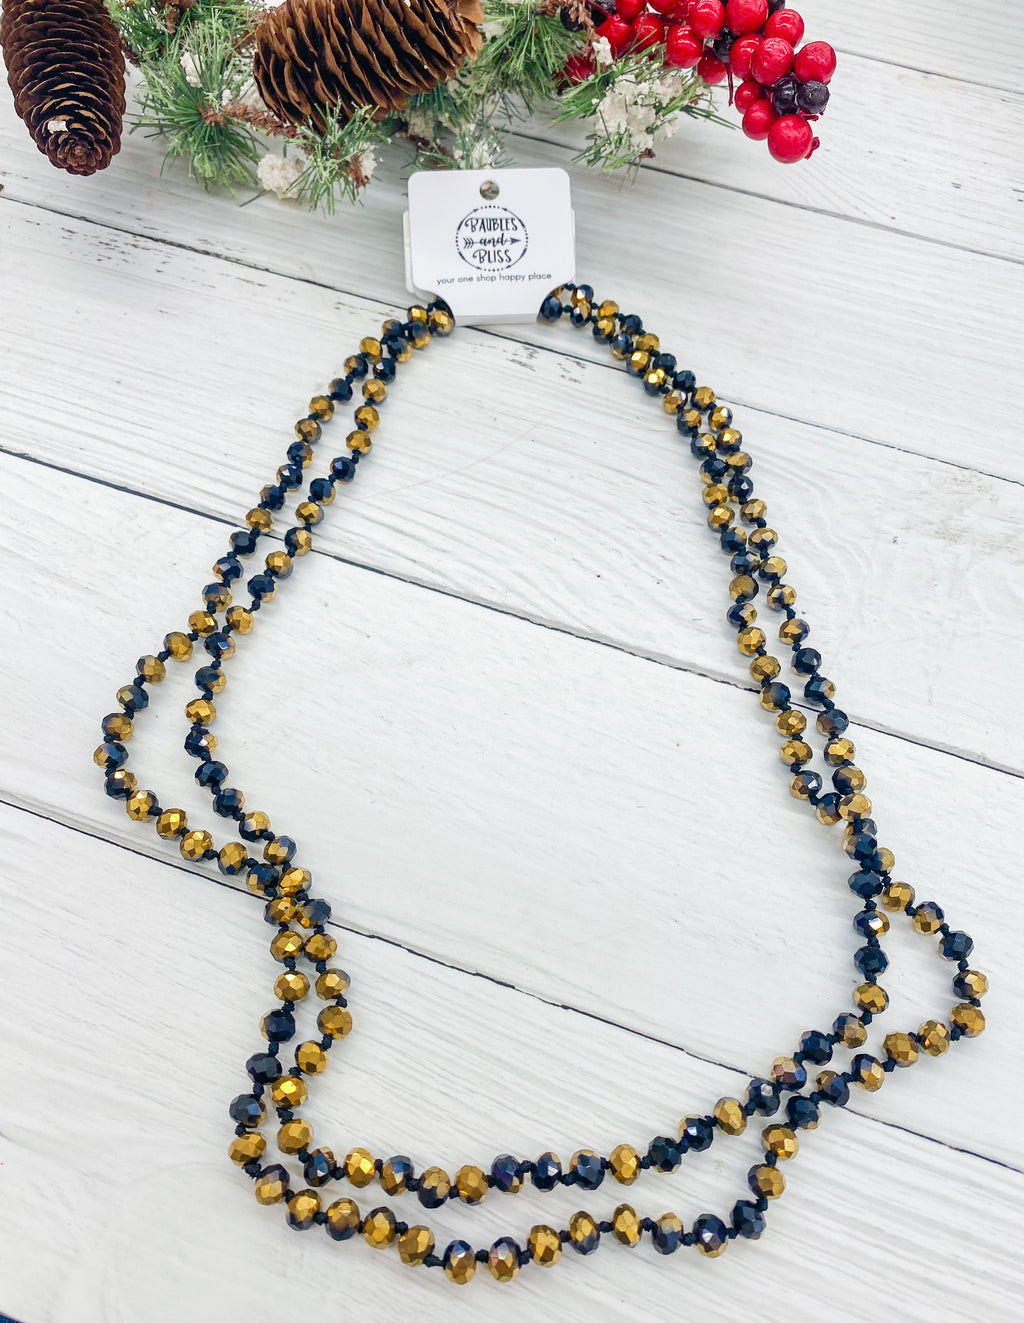 Black and Gold - Beaded Necklace 60"